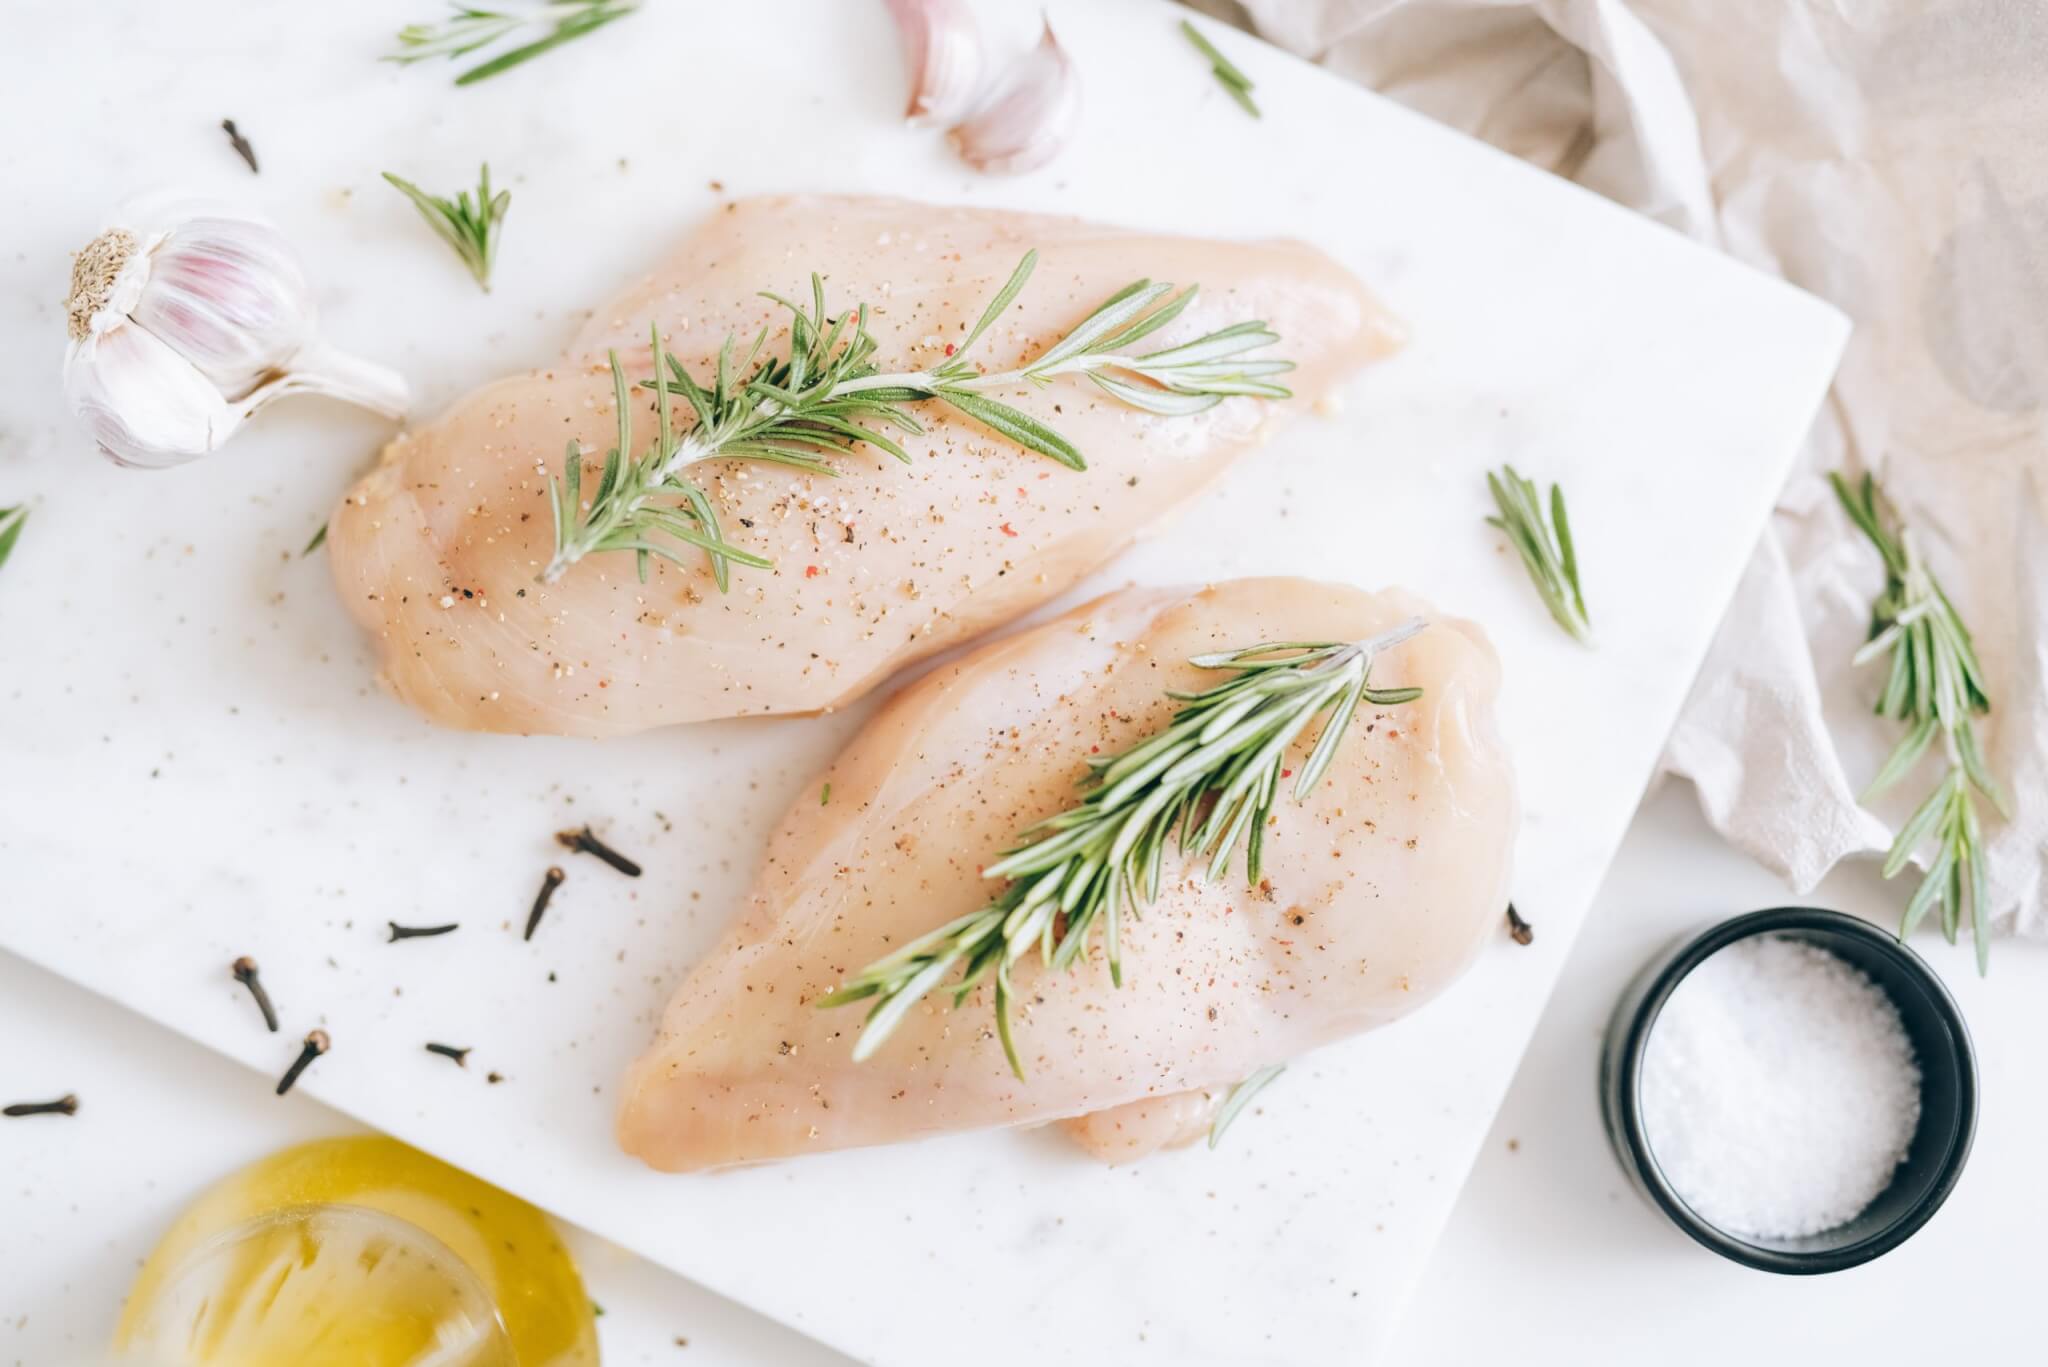 Best Ways To Cook Chicken Breasts: Top 5 Tasty Tips Most